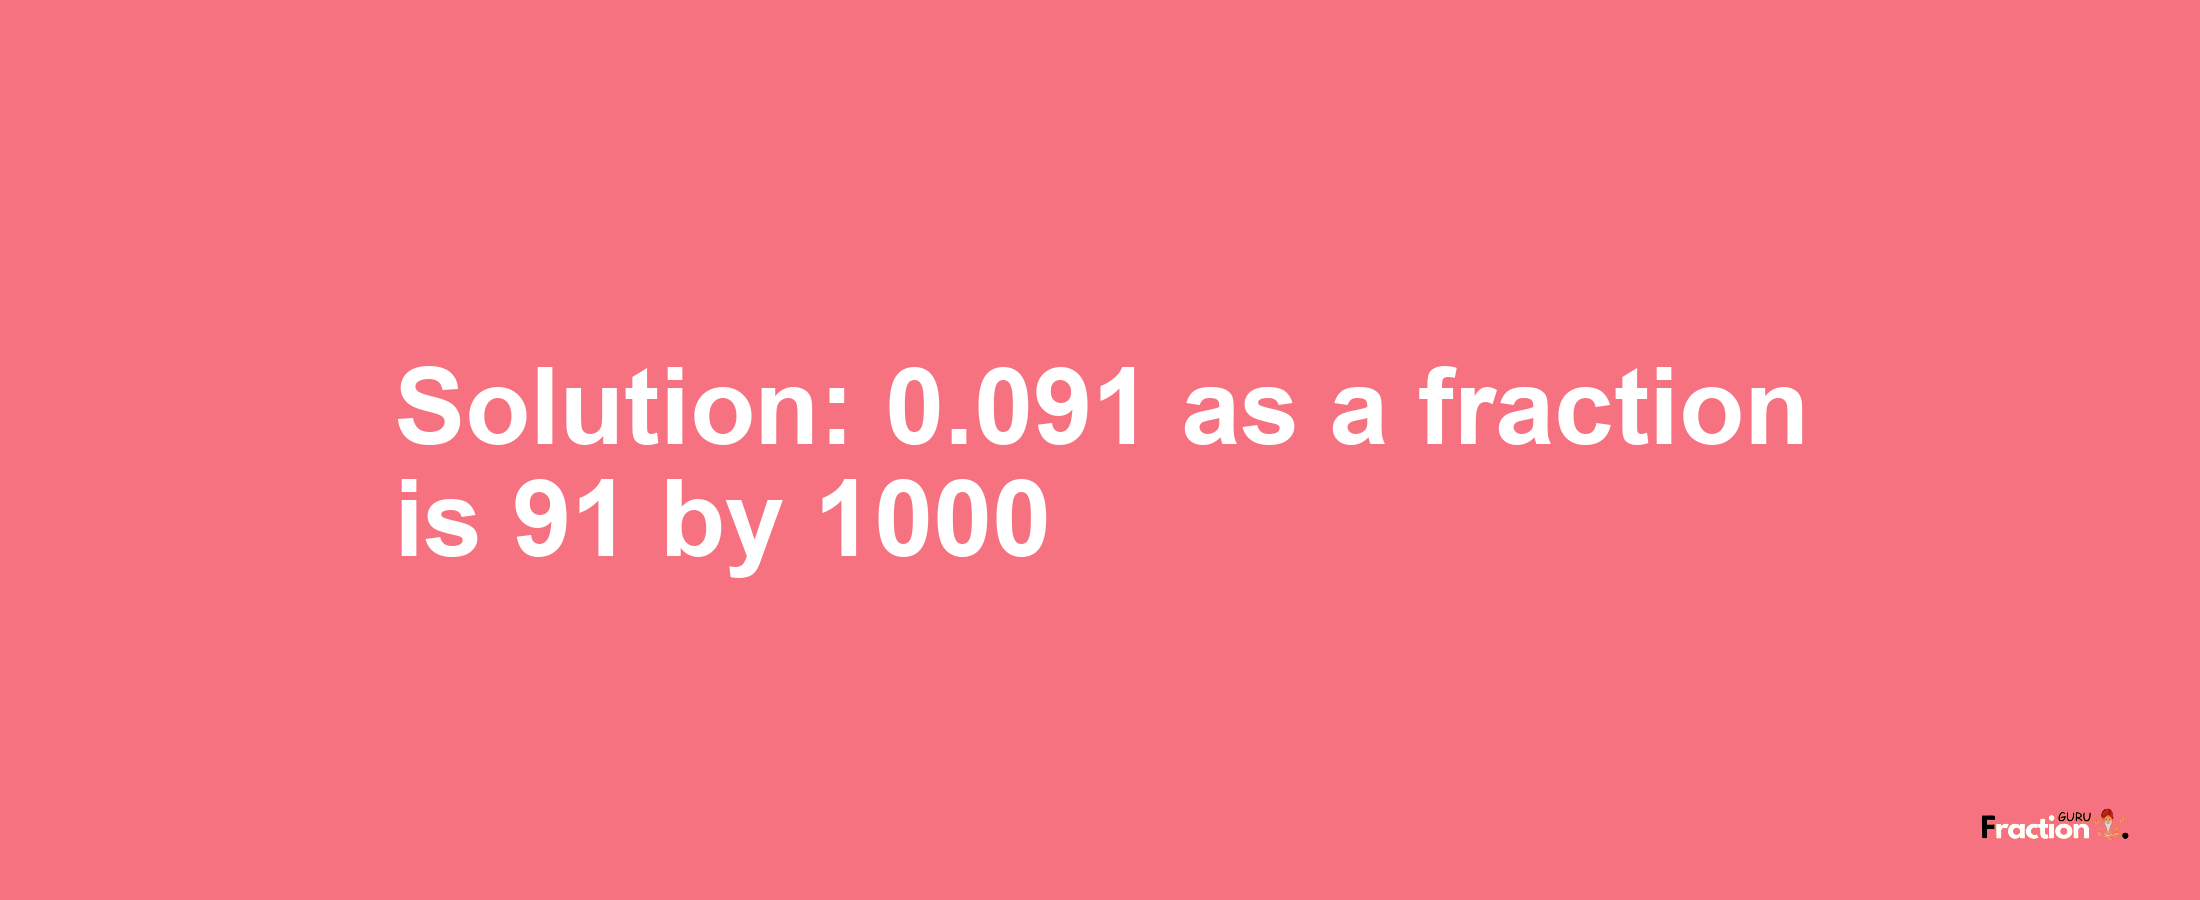 Solution:0.091 as a fraction is 91/1000